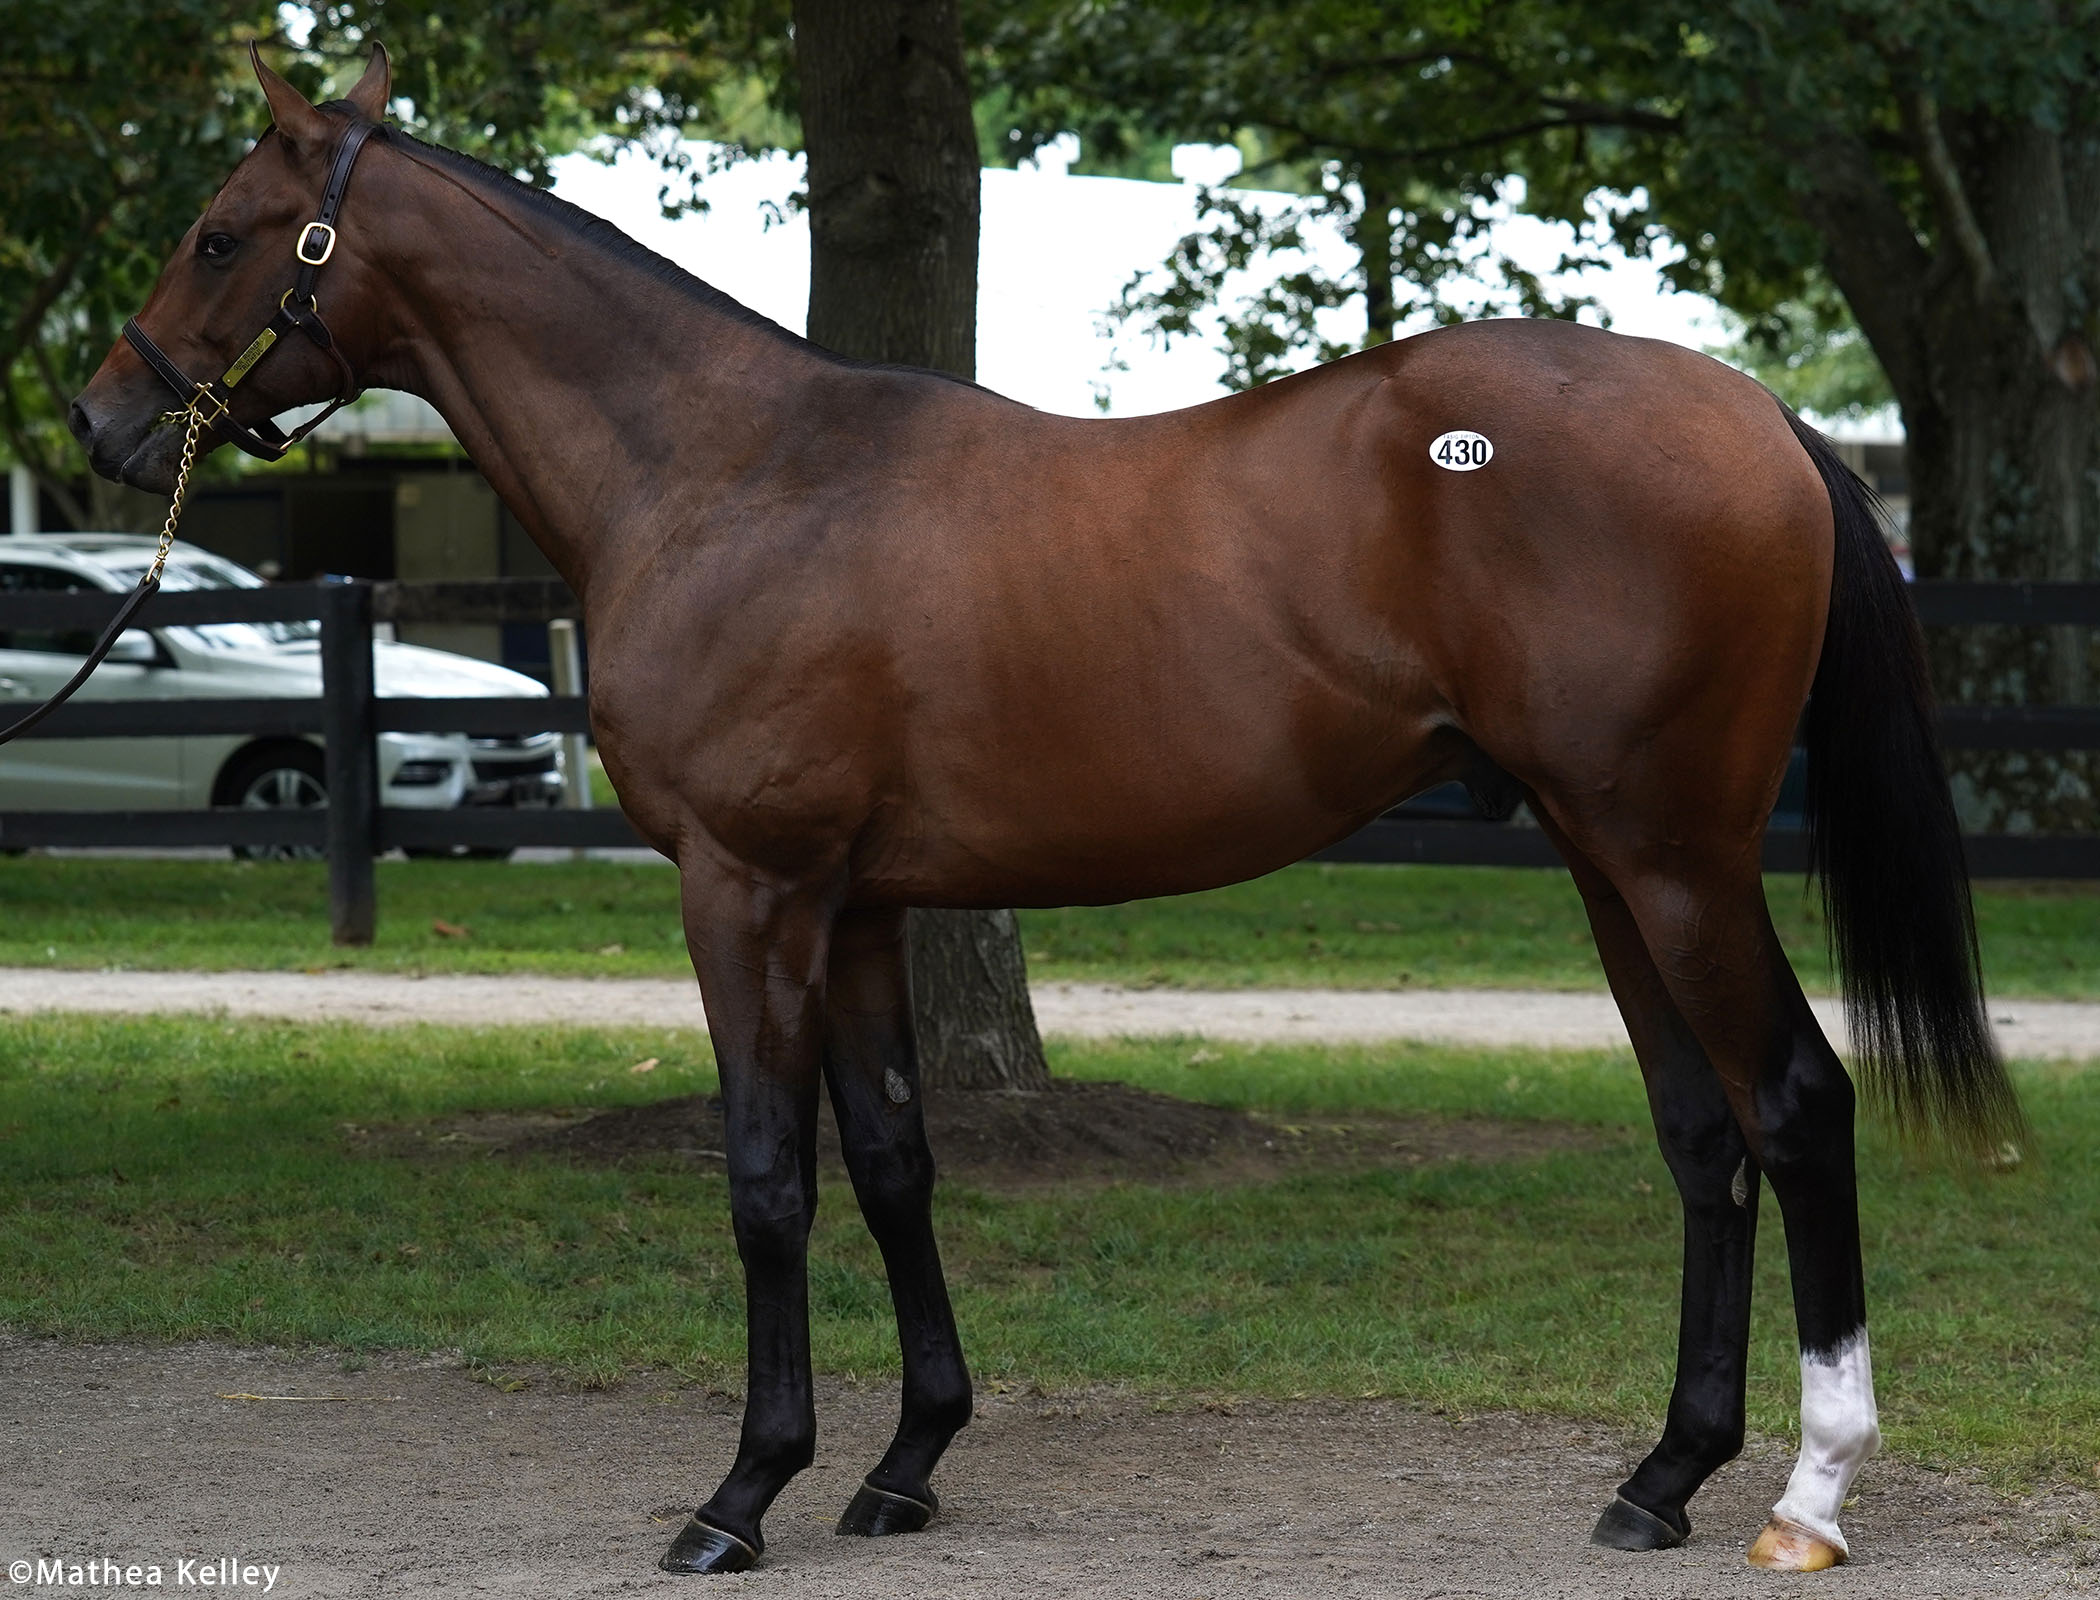 Gun Runner colt out of the Bodemeister mare Truthful, purchased at Fasig-Tipton's Selected Yearling Showcase and available for a thoroughbred racing partnership.